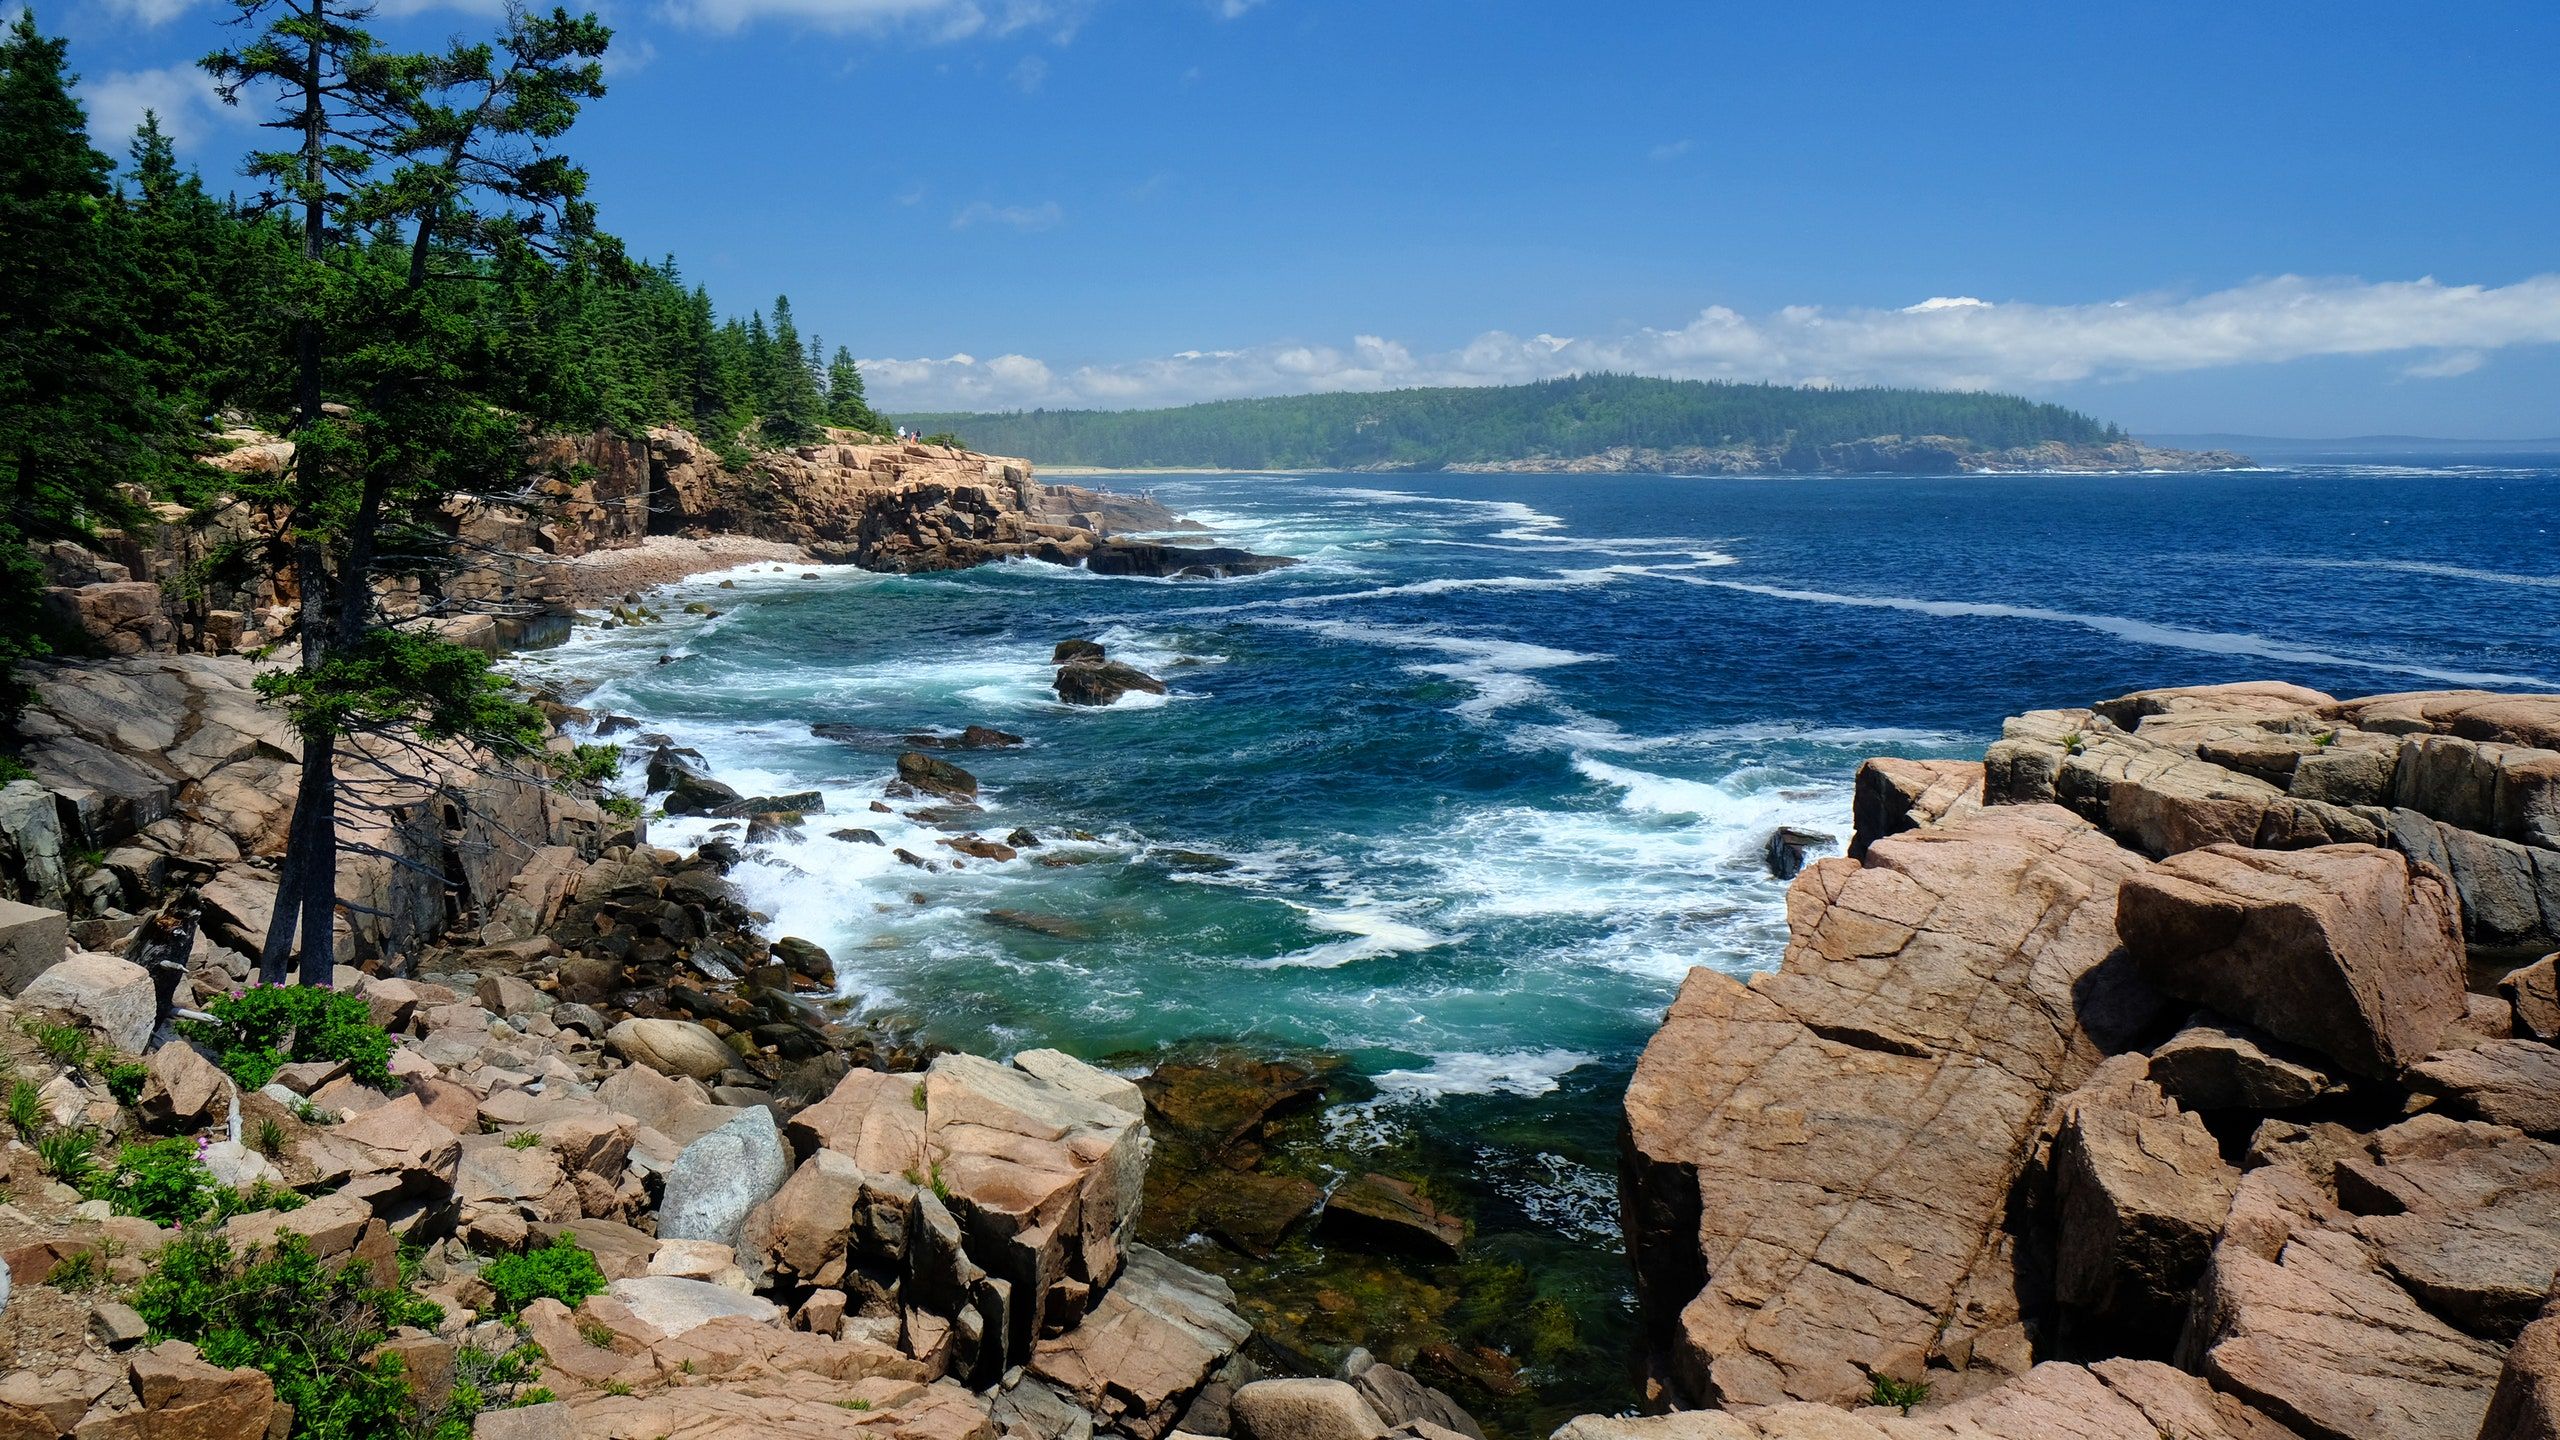 A Day of Hiking and Seafood at Maine's Acadia National Park. Condé Nast Traveler